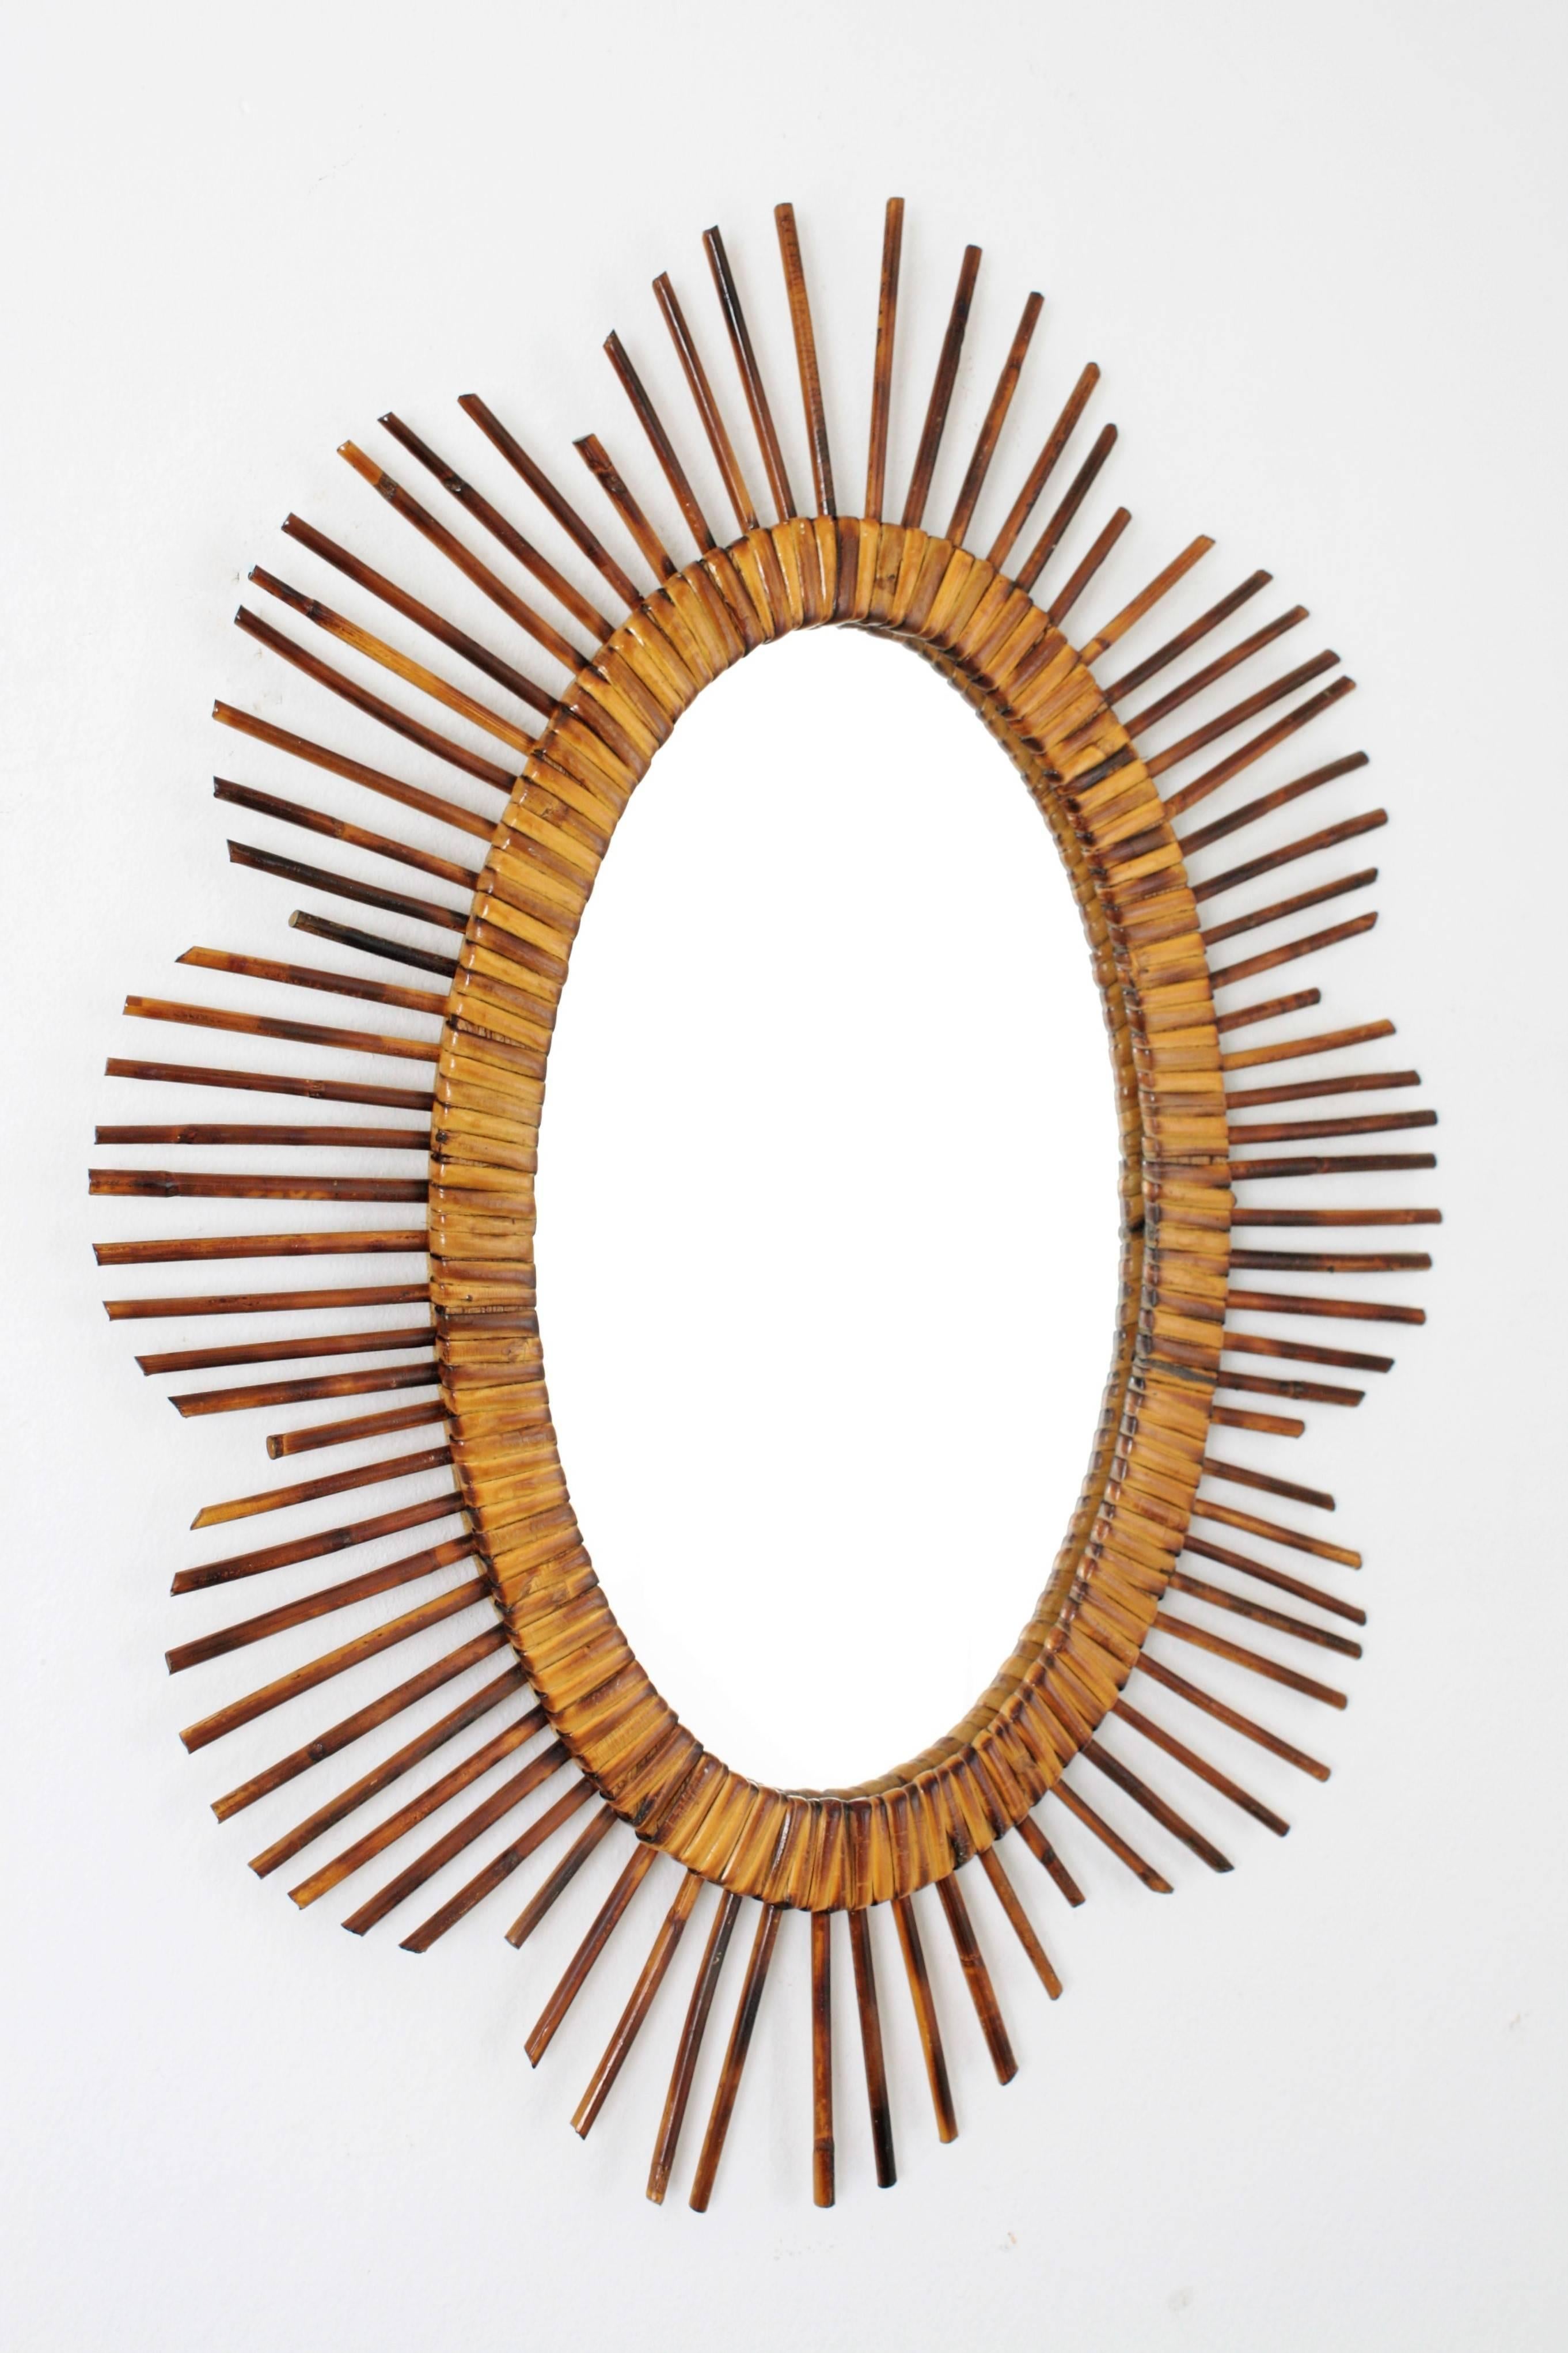 Amazing handcrafted rattan sunburst or flower burst oval mirror with pyrography decorations.
Beautiful to place it alone or creating a wall decoration with other mirrors in this manner.
France, 1950s-1960s.